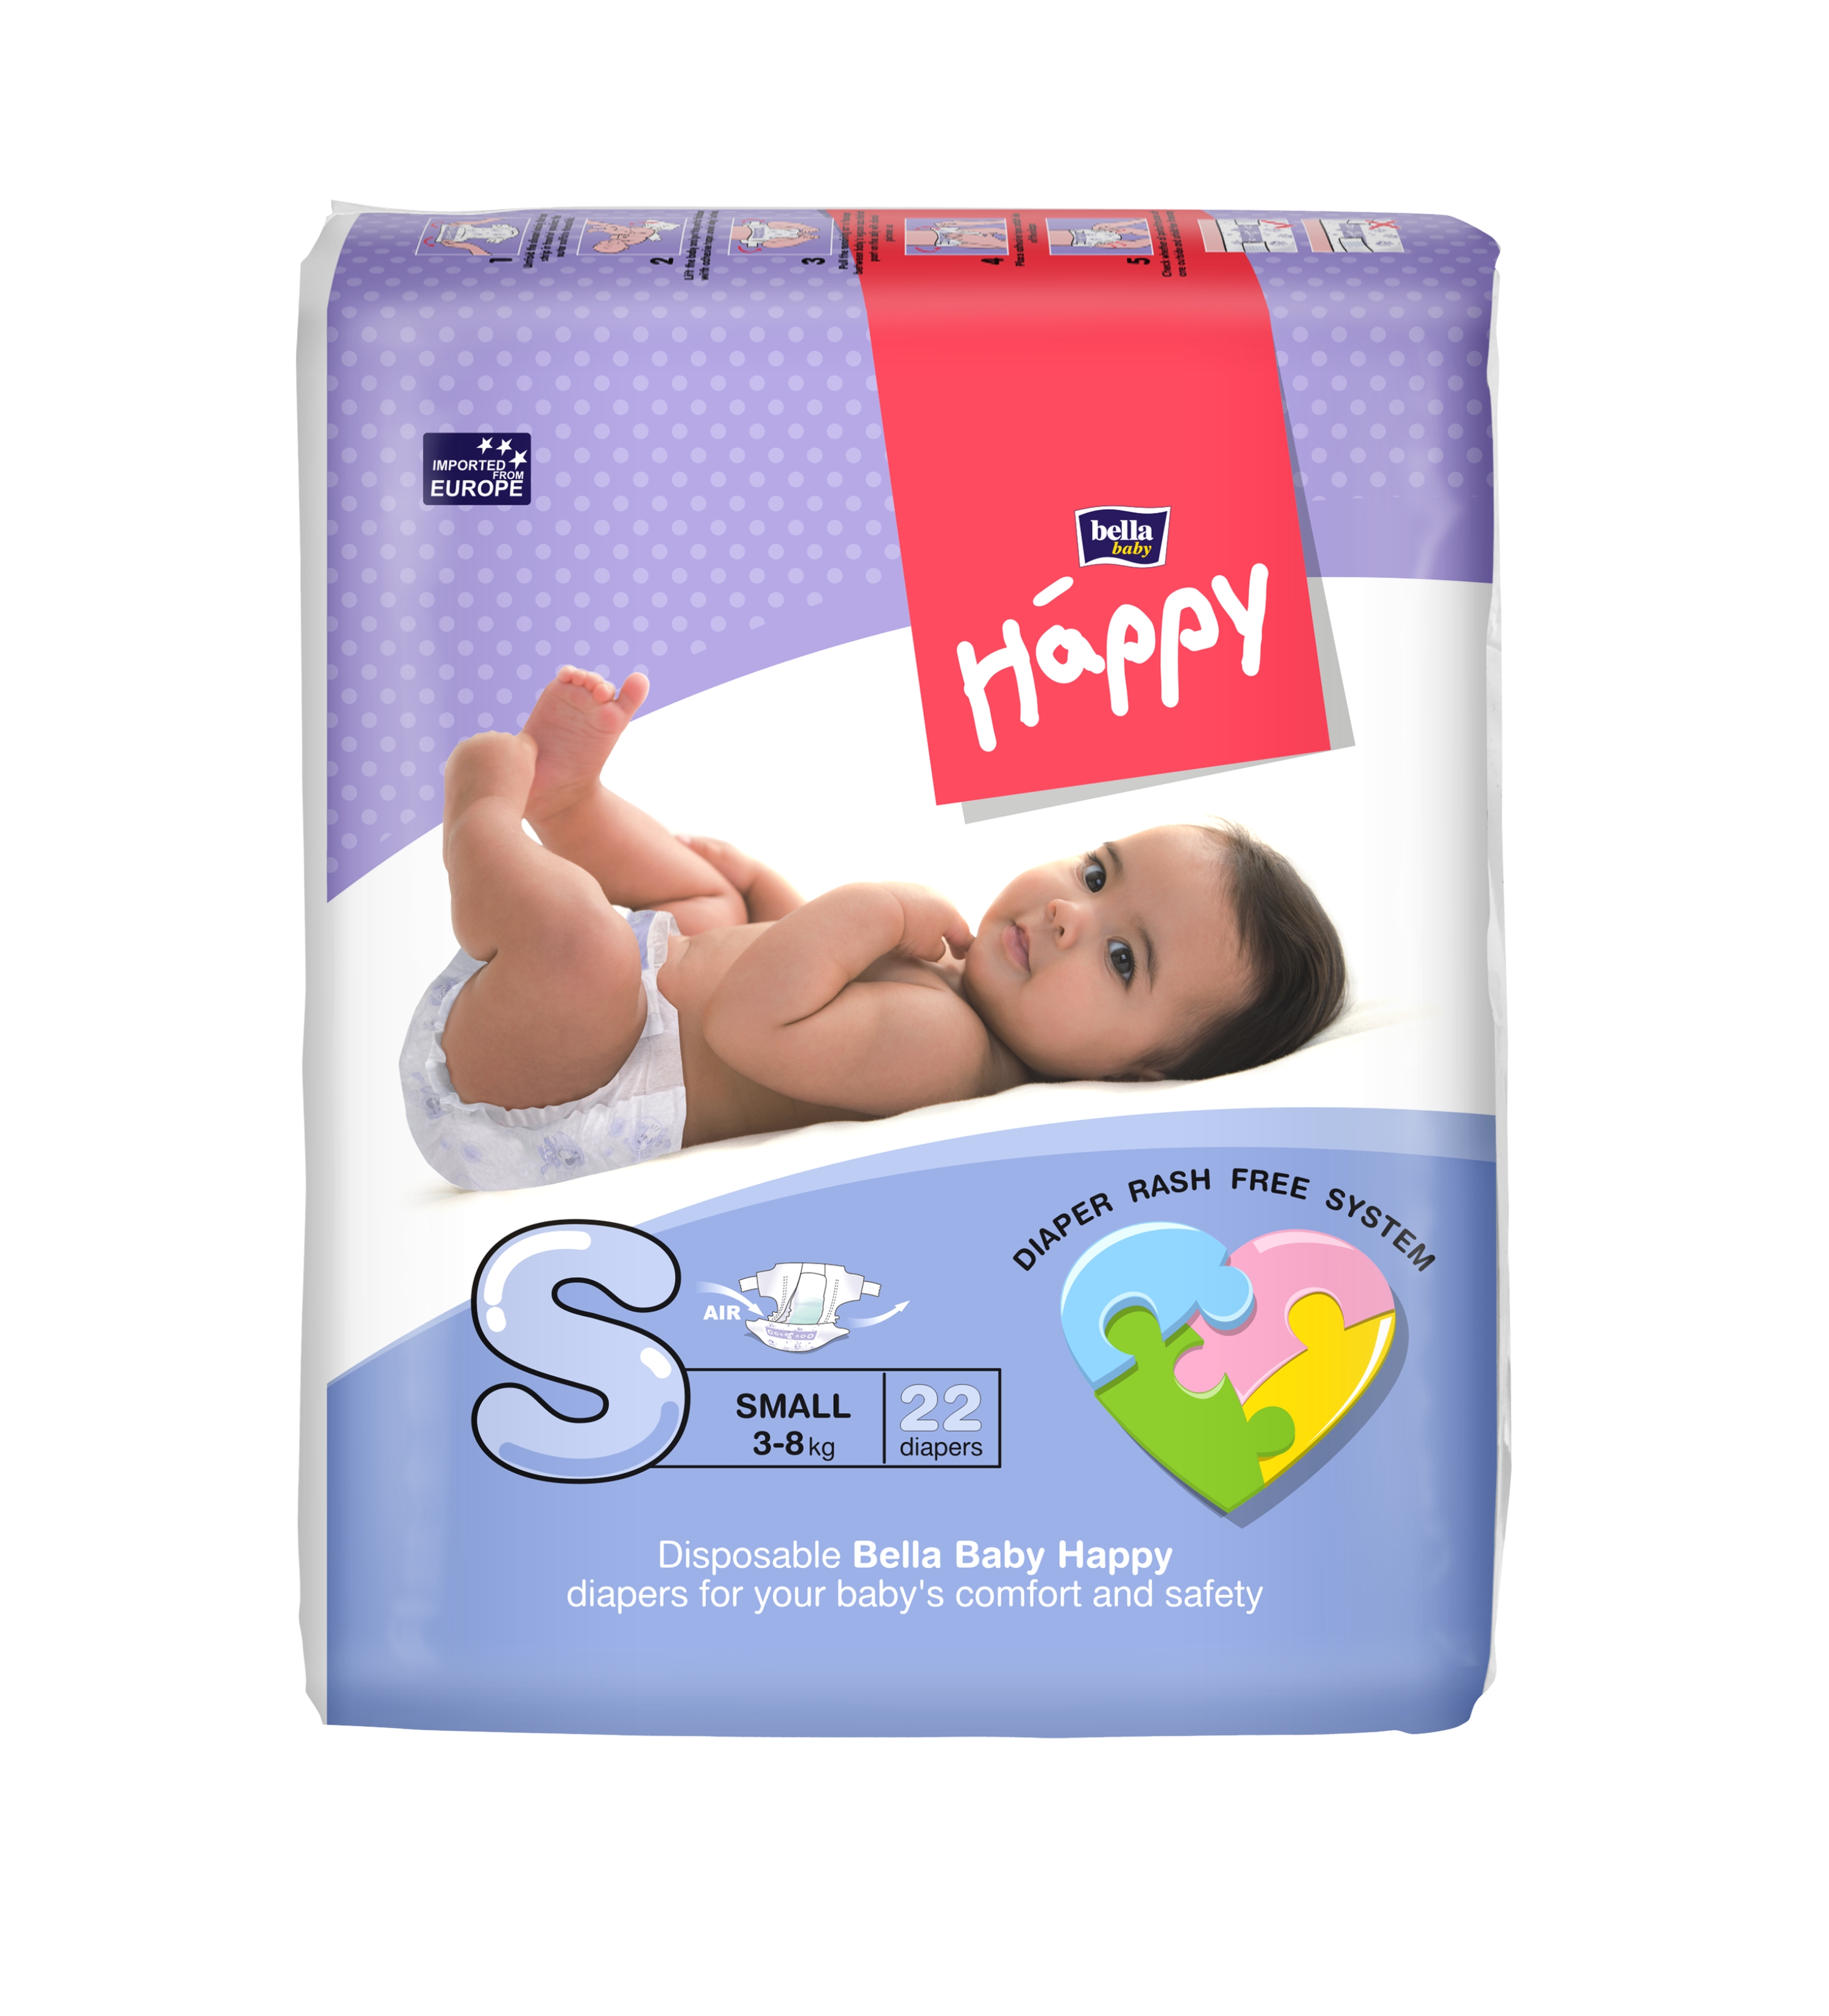 Buy BELLA BABY HAPPY DIAPERS SMALL 22 PCS at Best Price Online